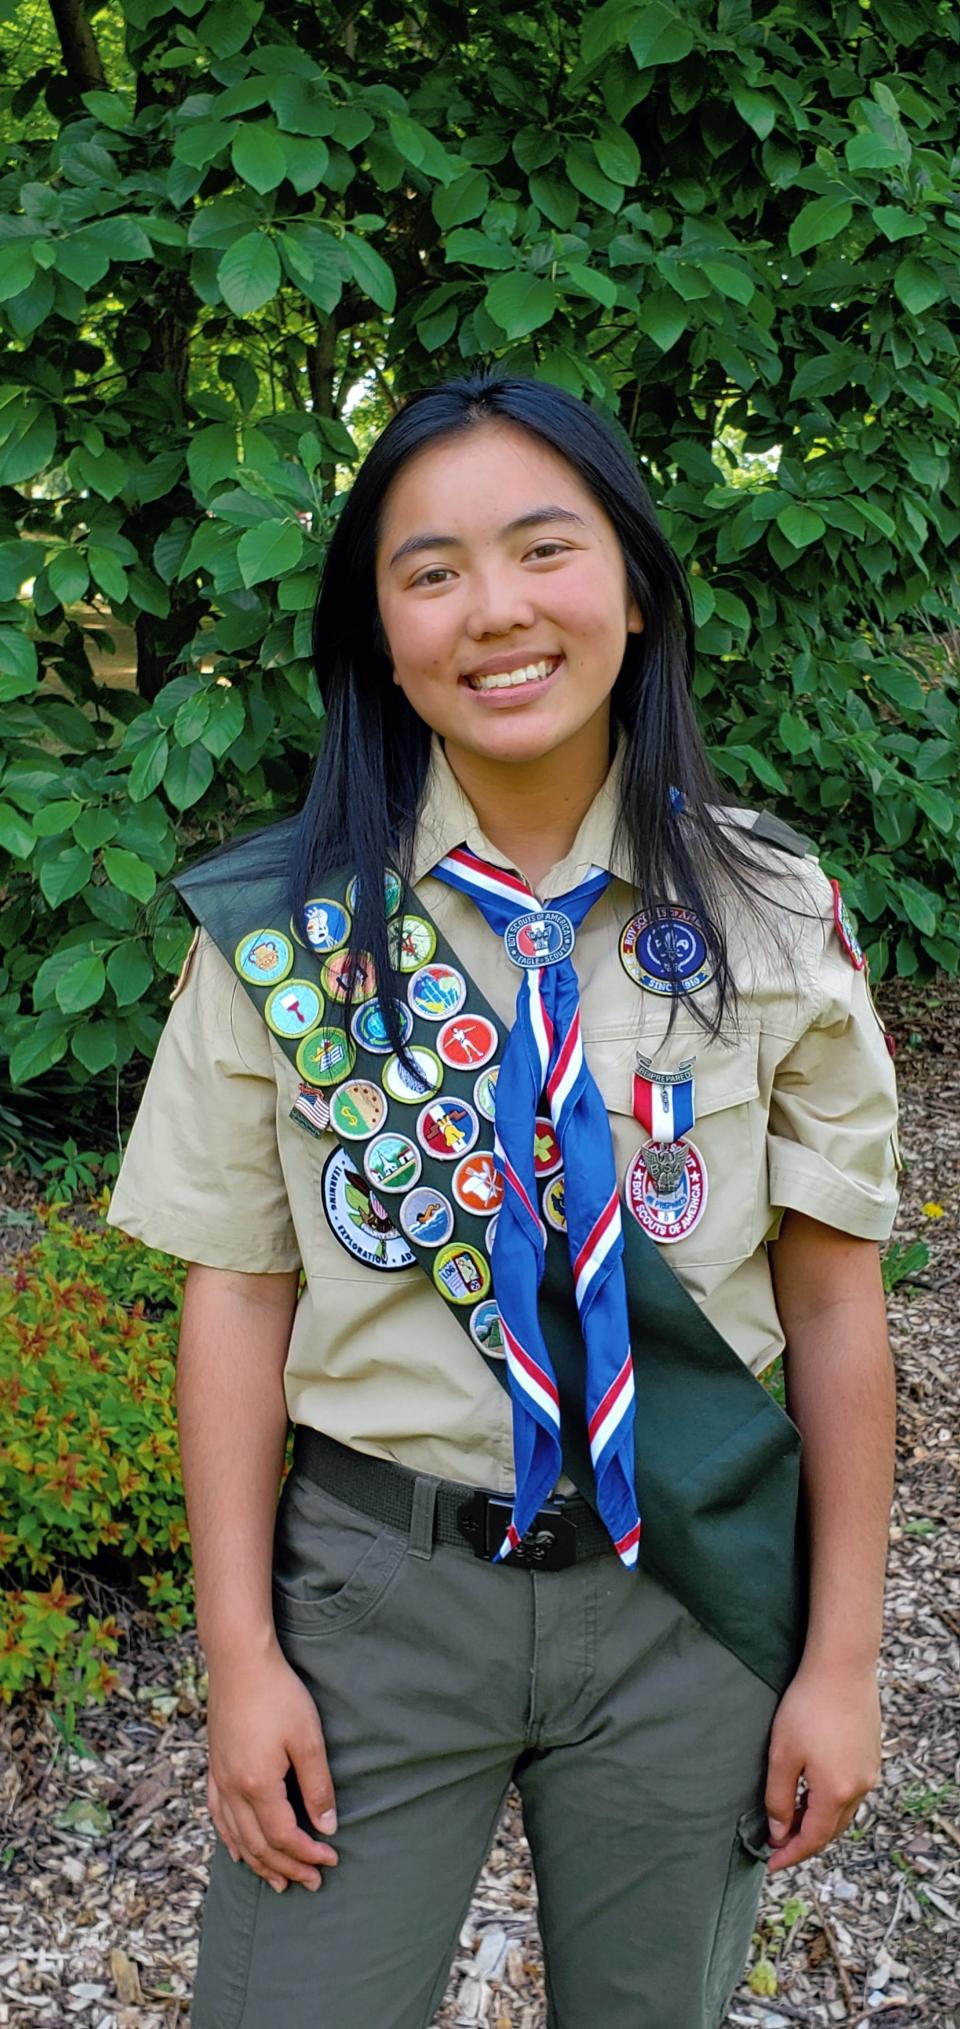 Lia Grammer wears her full Eagle Scout uniform in May 2022 in Montgomery, NY.